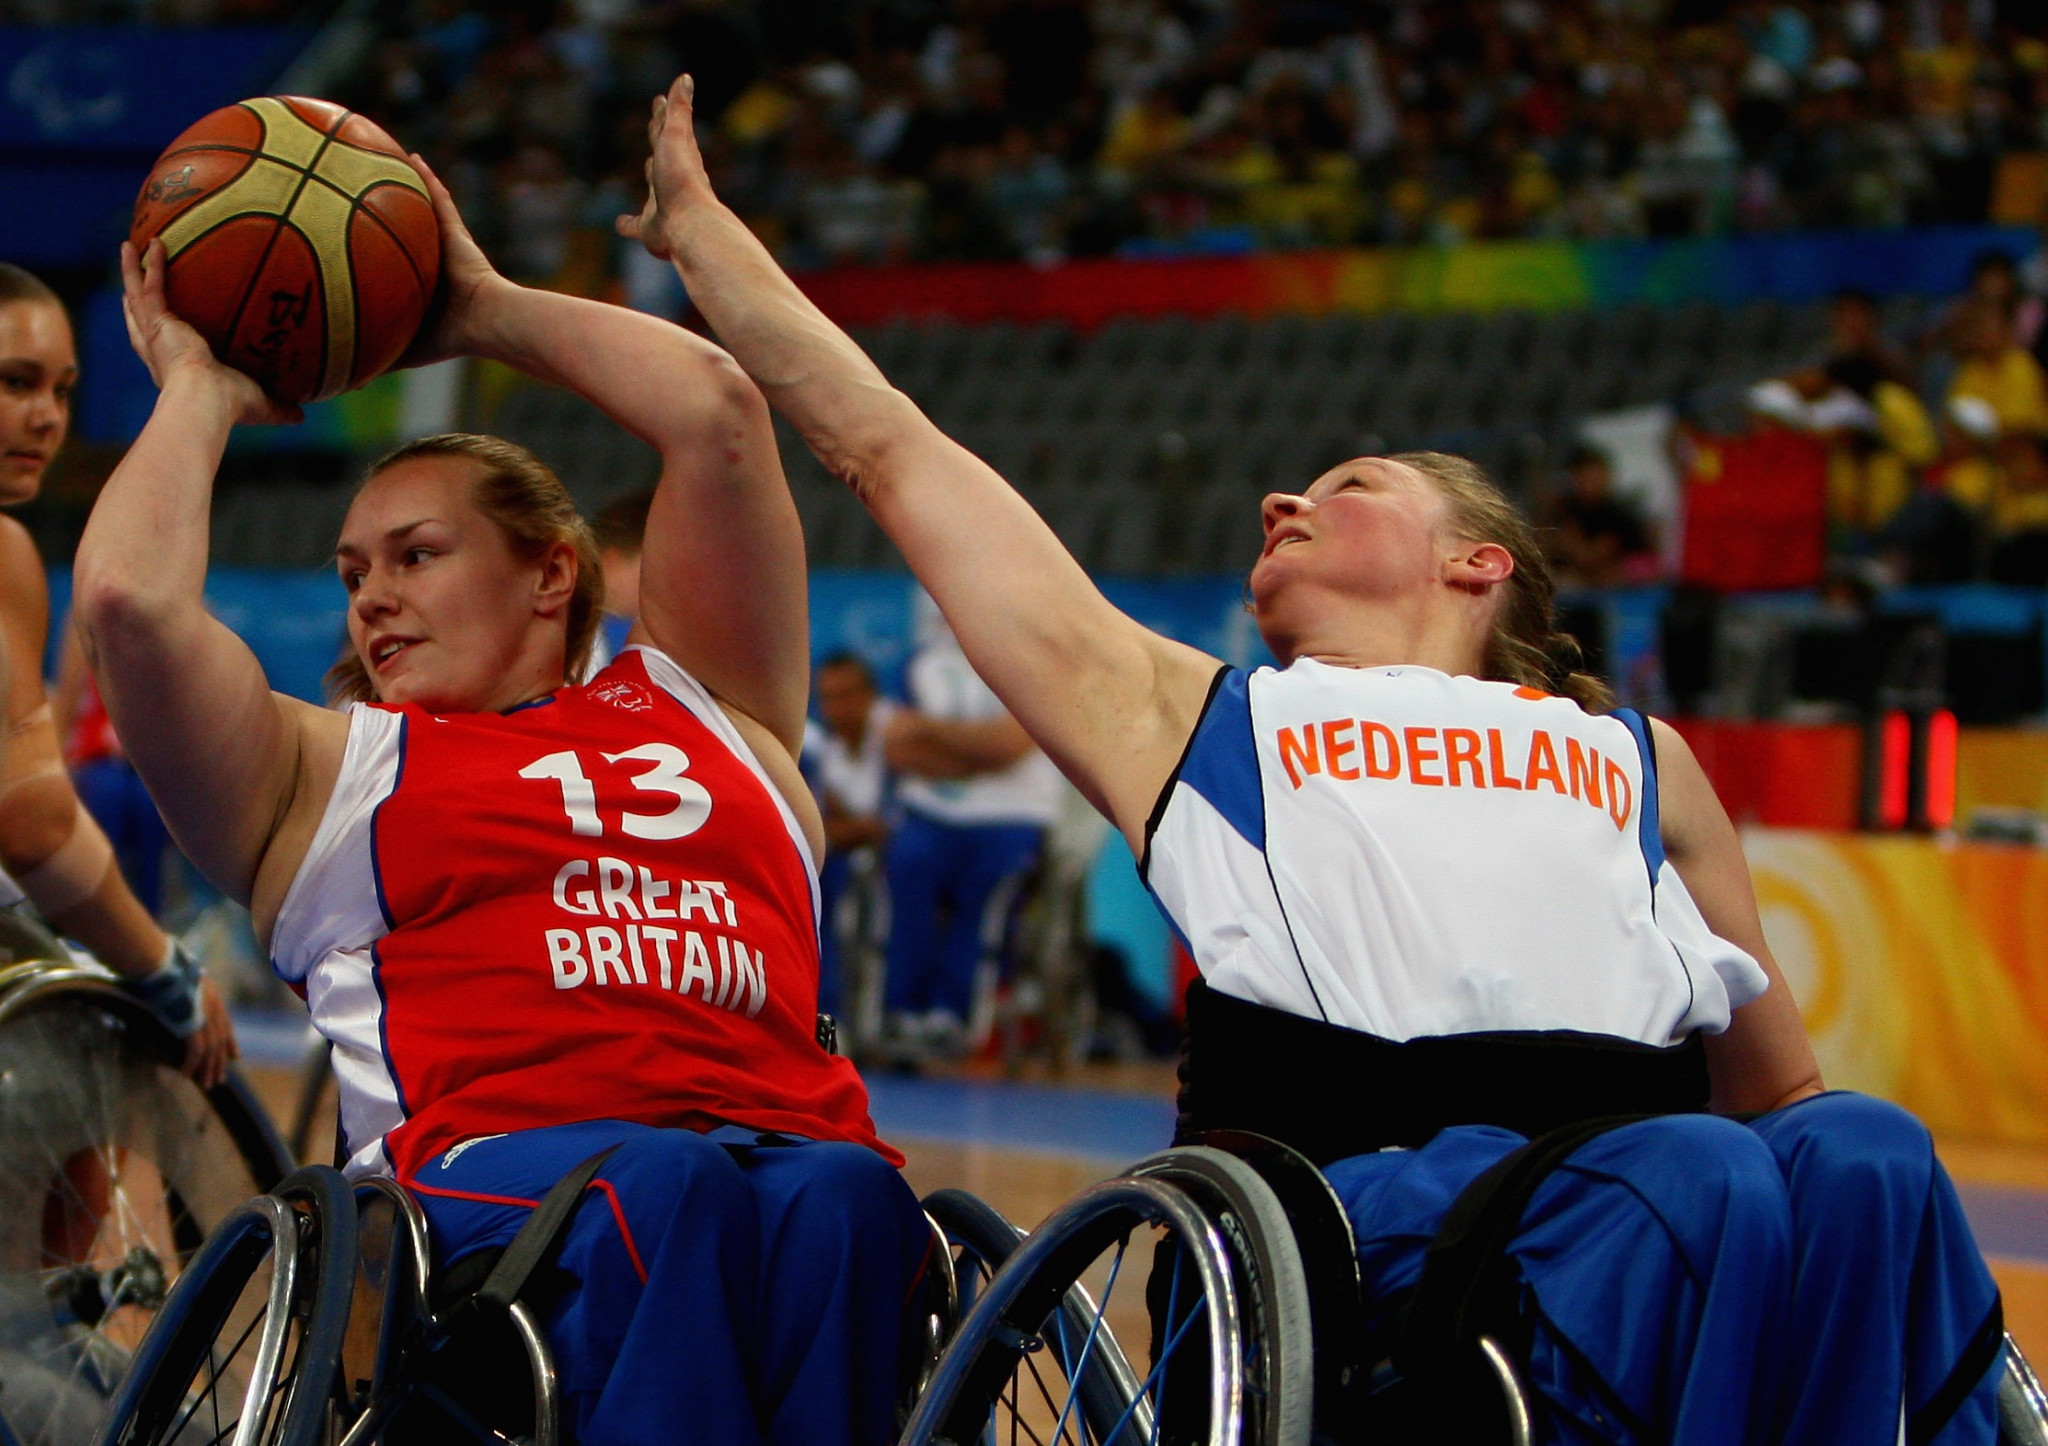 Barbara van Bergen made her Paralympic debut with the Dutch wheelchair basketball team at Beijing 2008 ©Getty Images